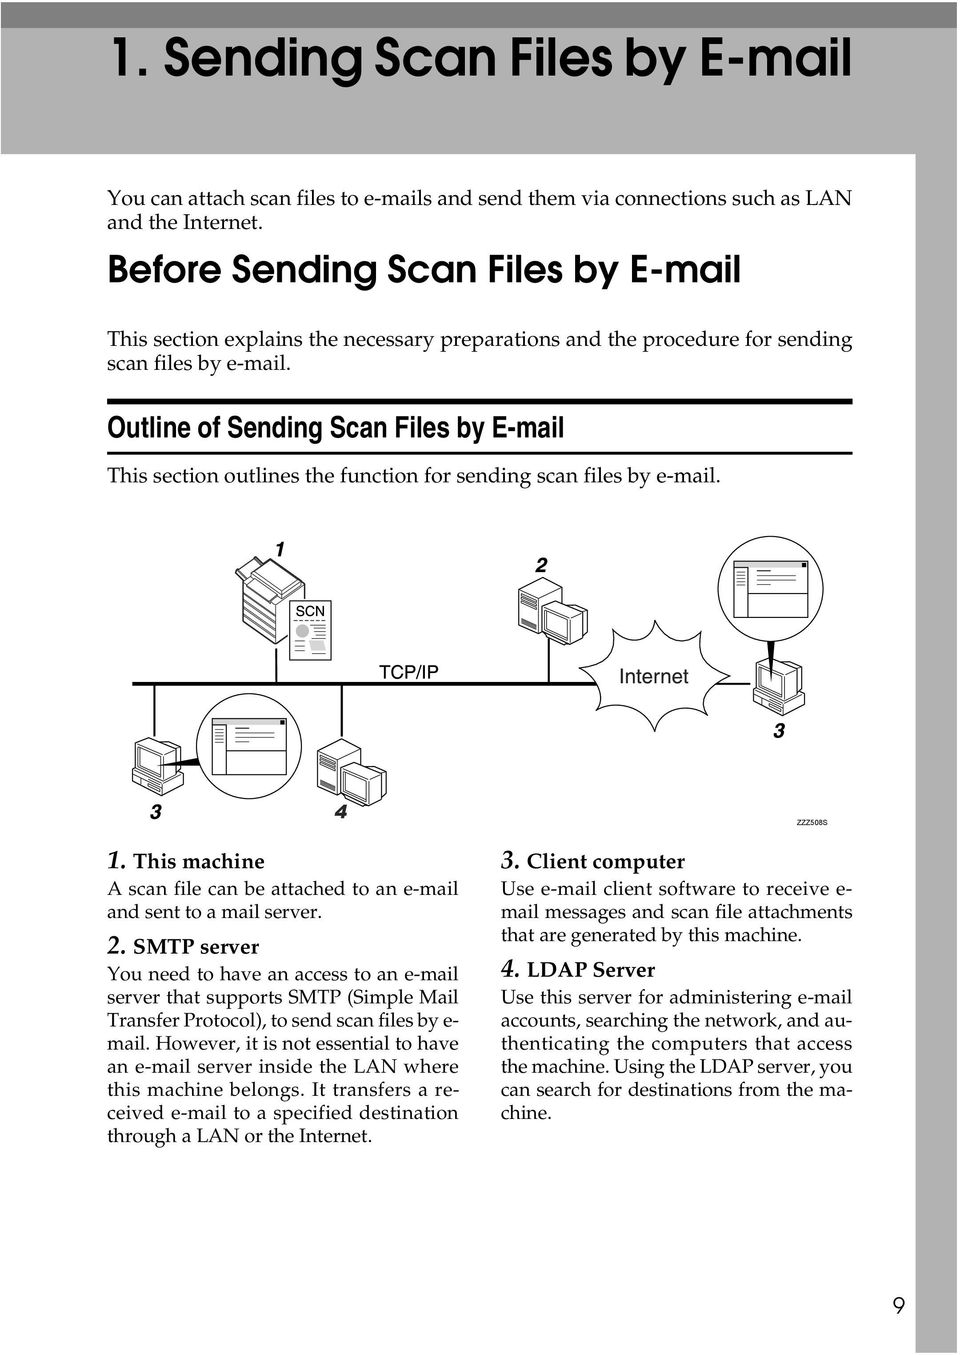 Outline of Sending Scan Files by E-mail This section outlines the function for sending scan files by e-mail. ZZZ508S 1. This machine A scan file can be attached to an e-mail and sent to a mail server.